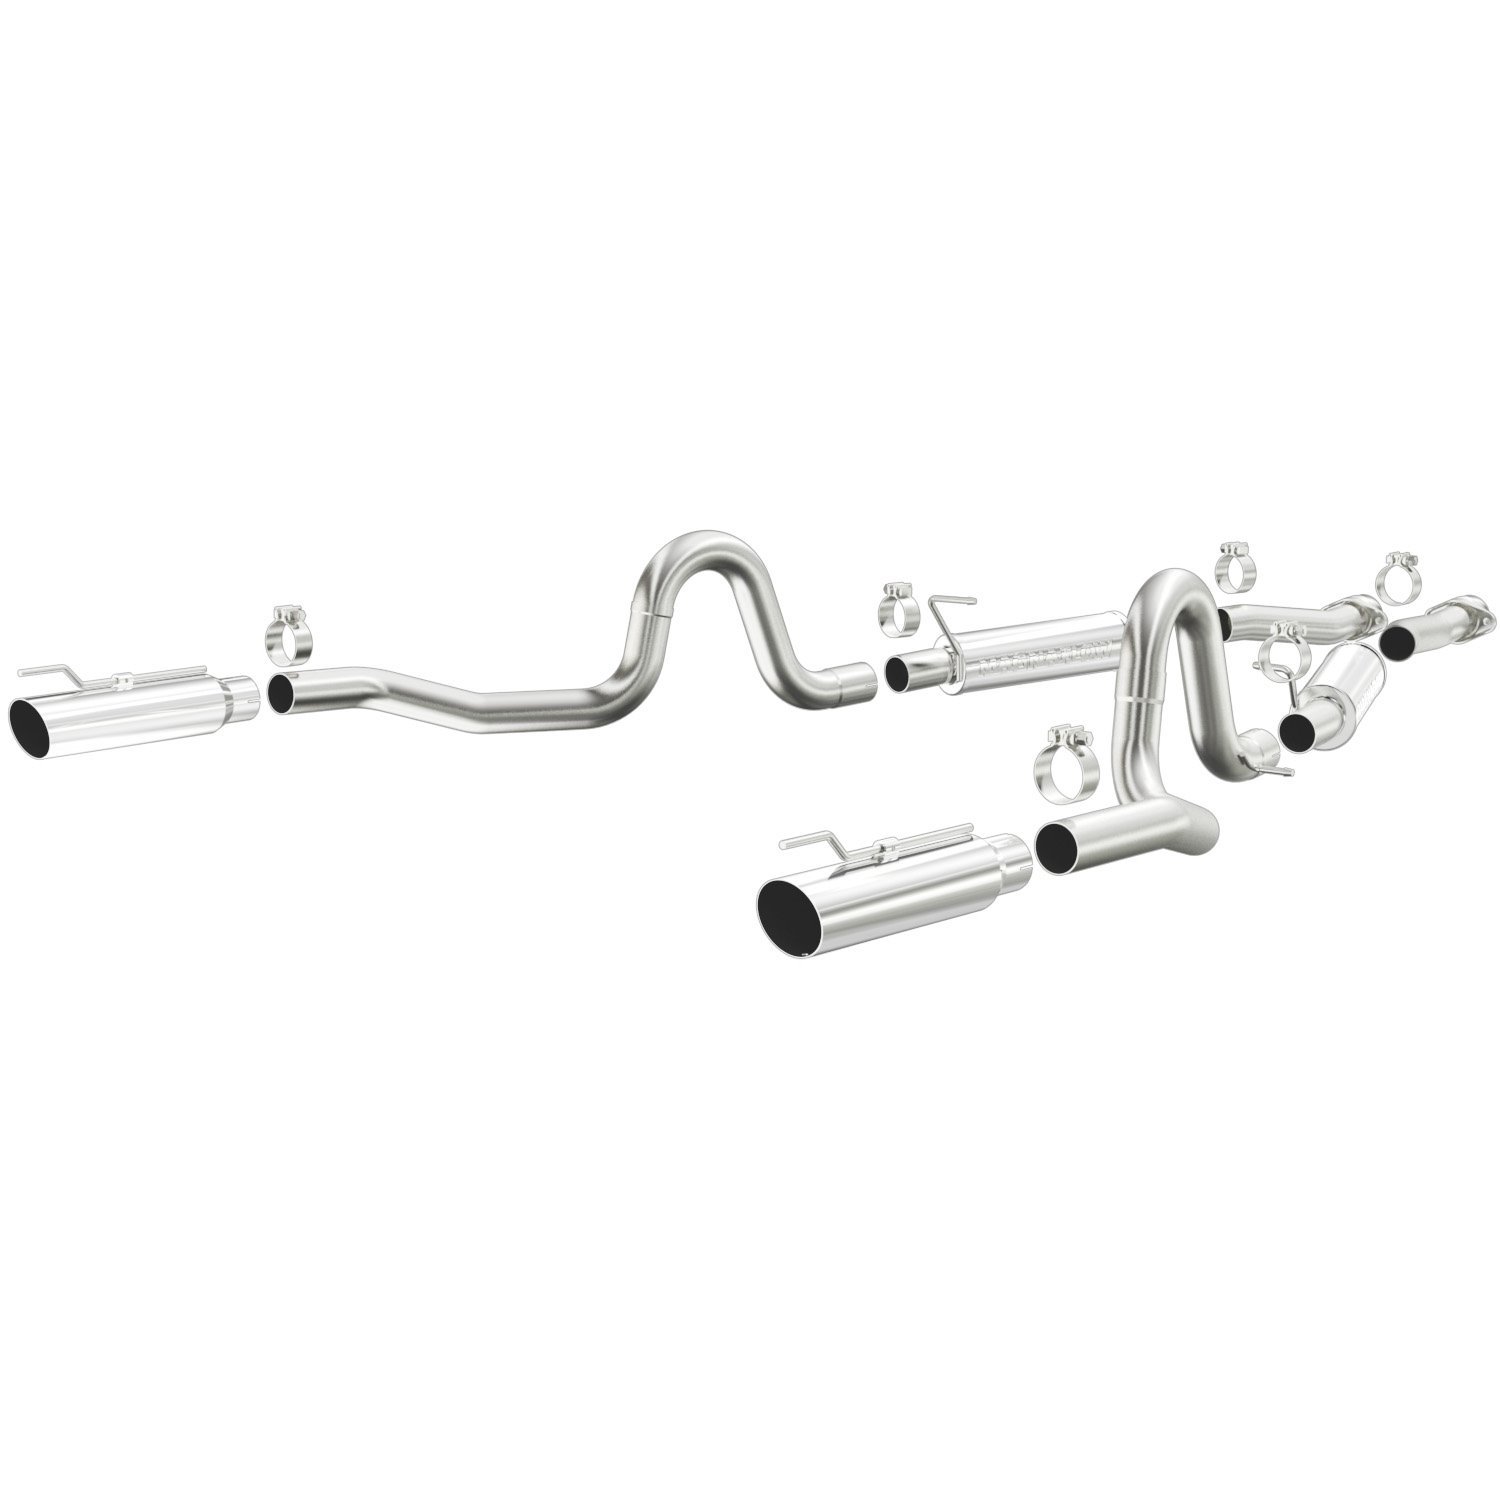 Competition Series Cat-Back Exhaust System 1994-1995 Mustang GT/Cobra 5.0L V8